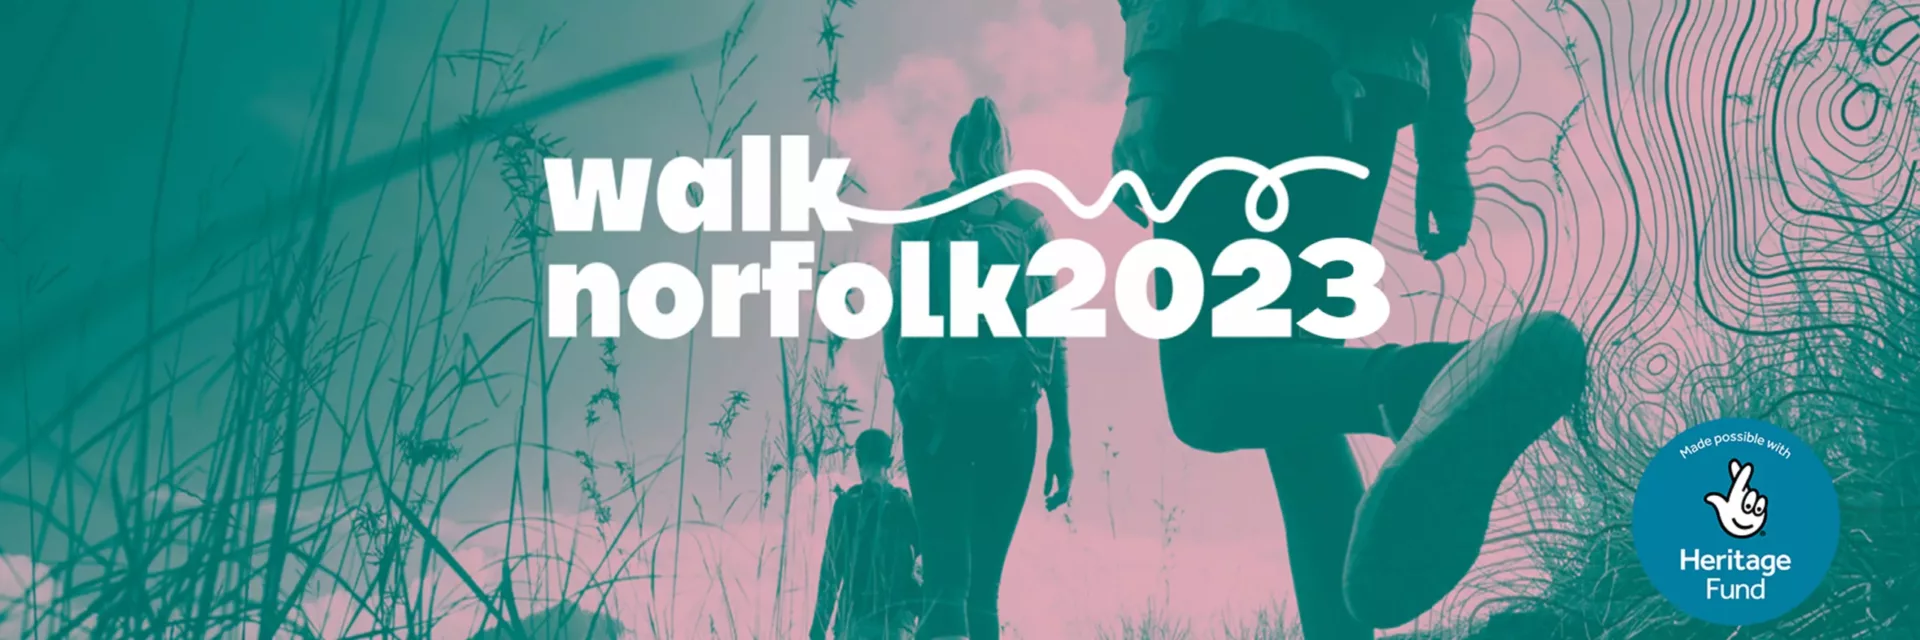 WalkNorfolk 2023 text on a background image with walking people shapes